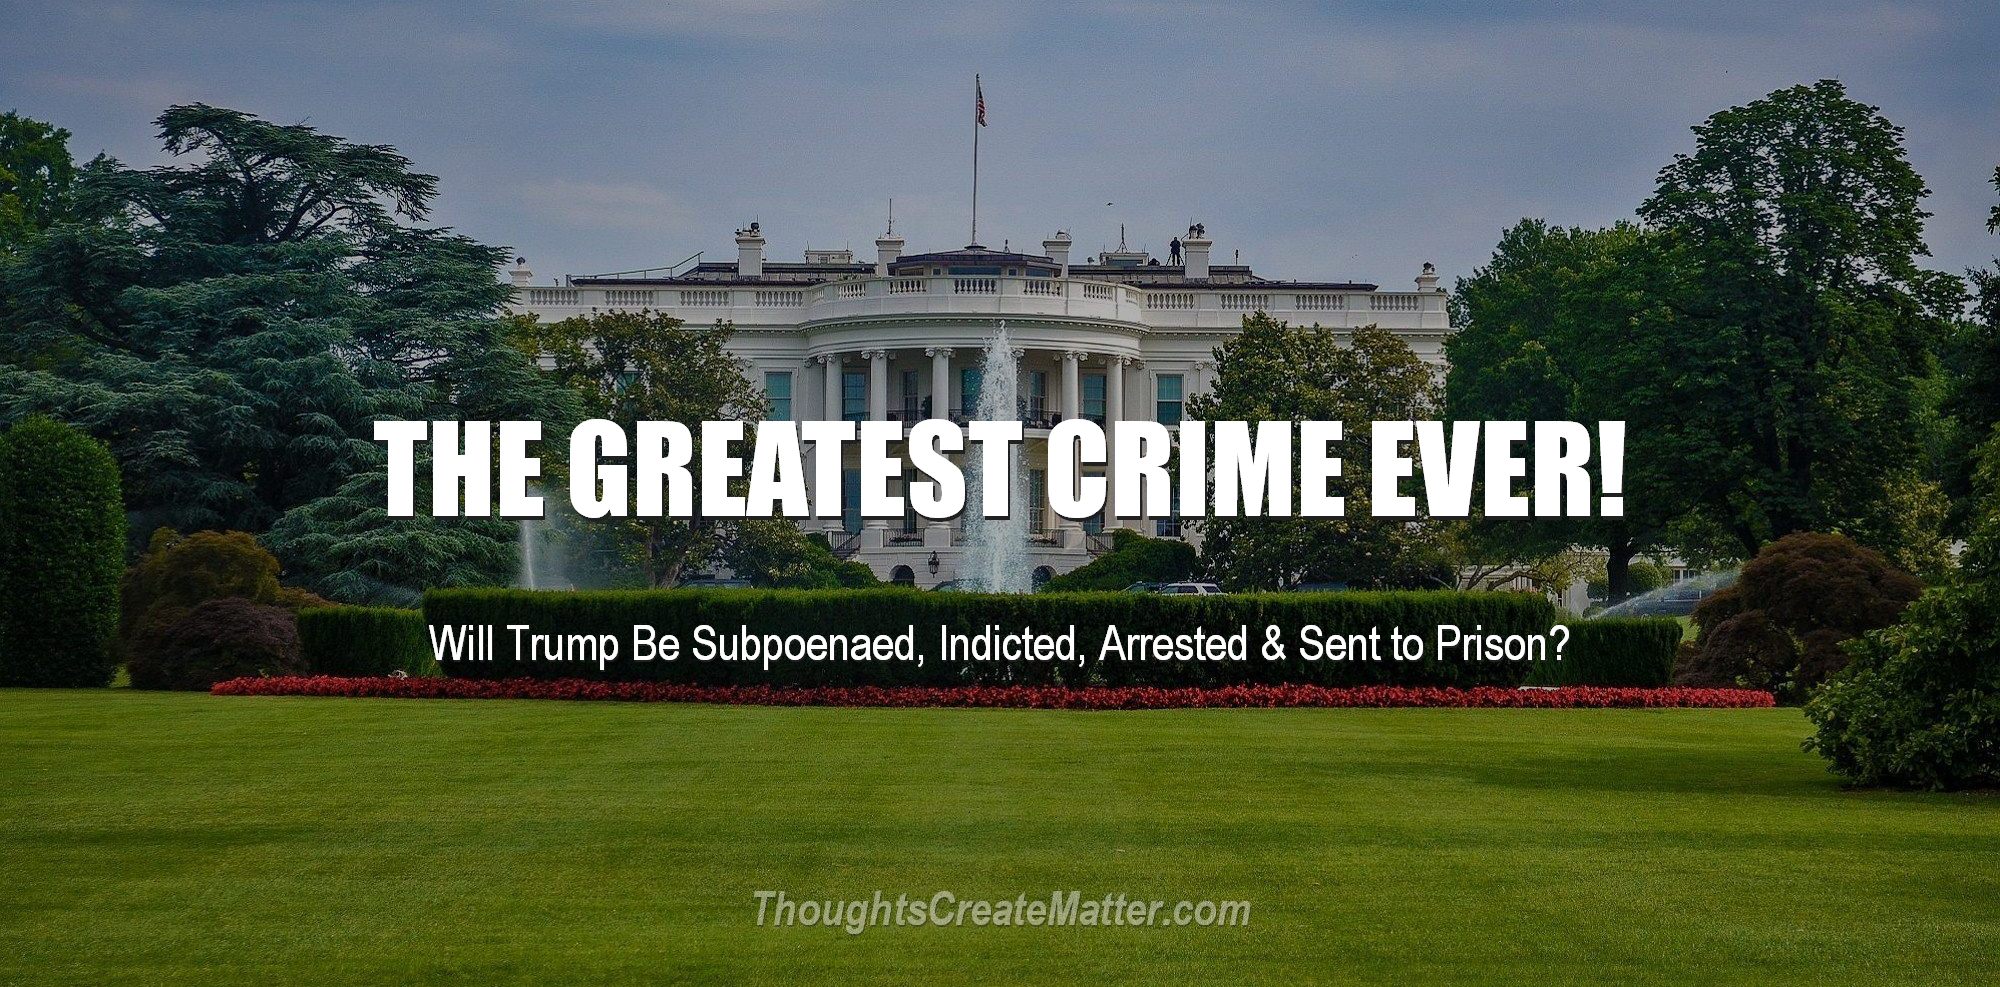 Whitehouse where the crime took place. Will Trump be subpoenaed, indicted, arrested and sent to prison? Is this the greatest crime ever?